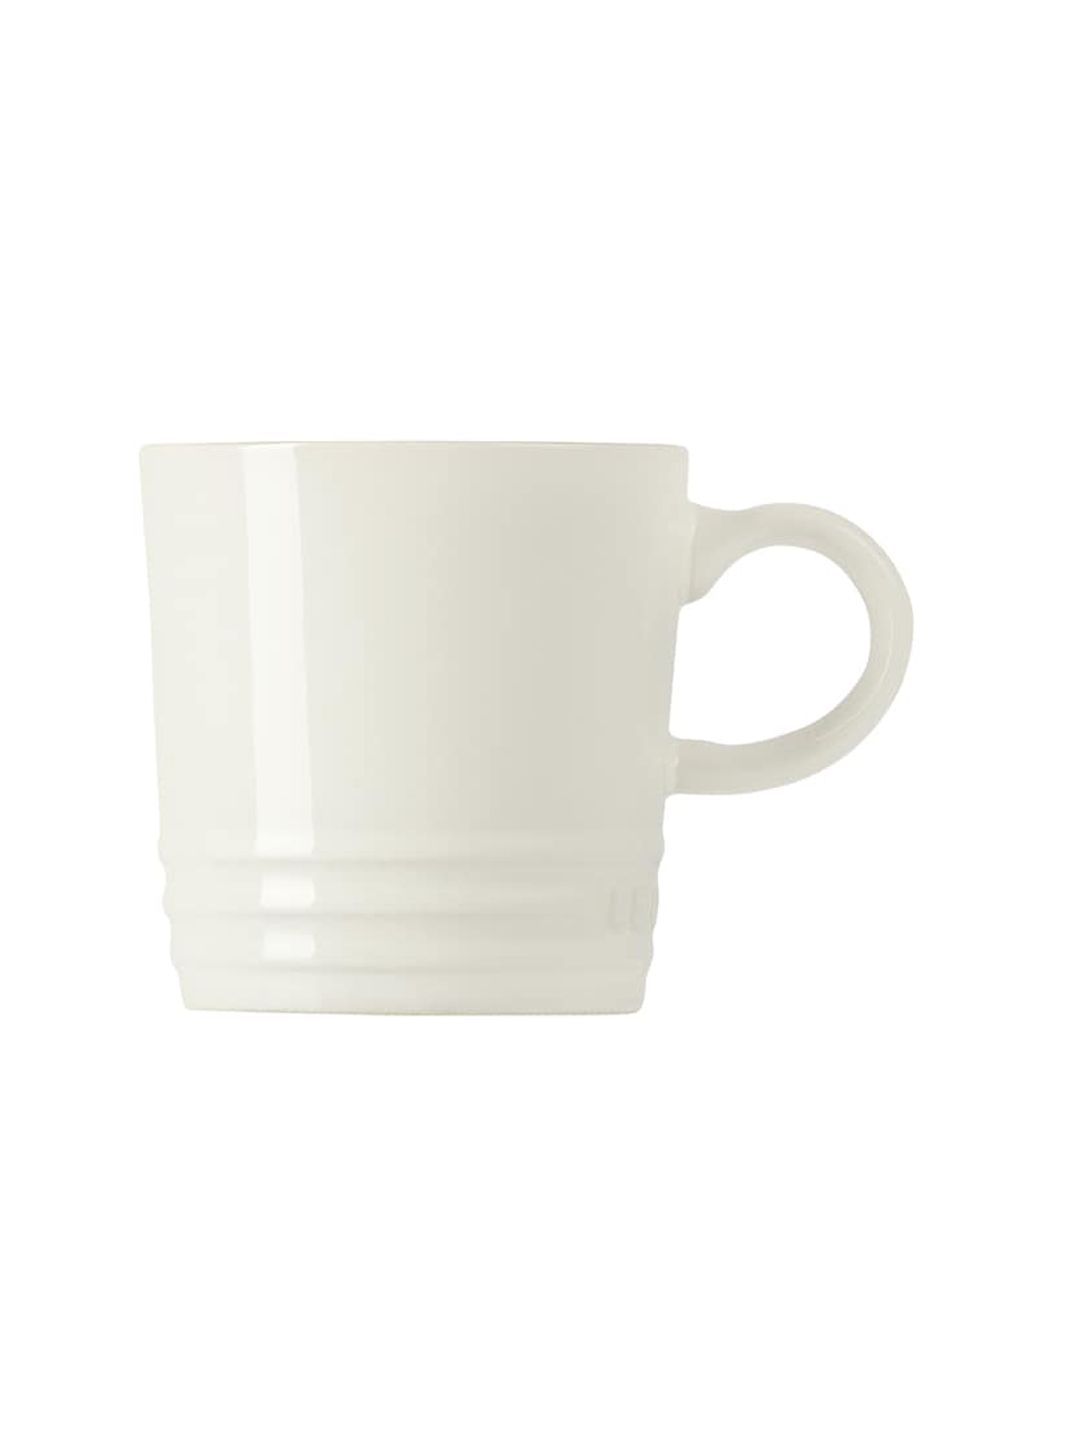 LE CREUSET White Solid Stoneware Glossy Mugs Set of Cups and Mugs Price in India